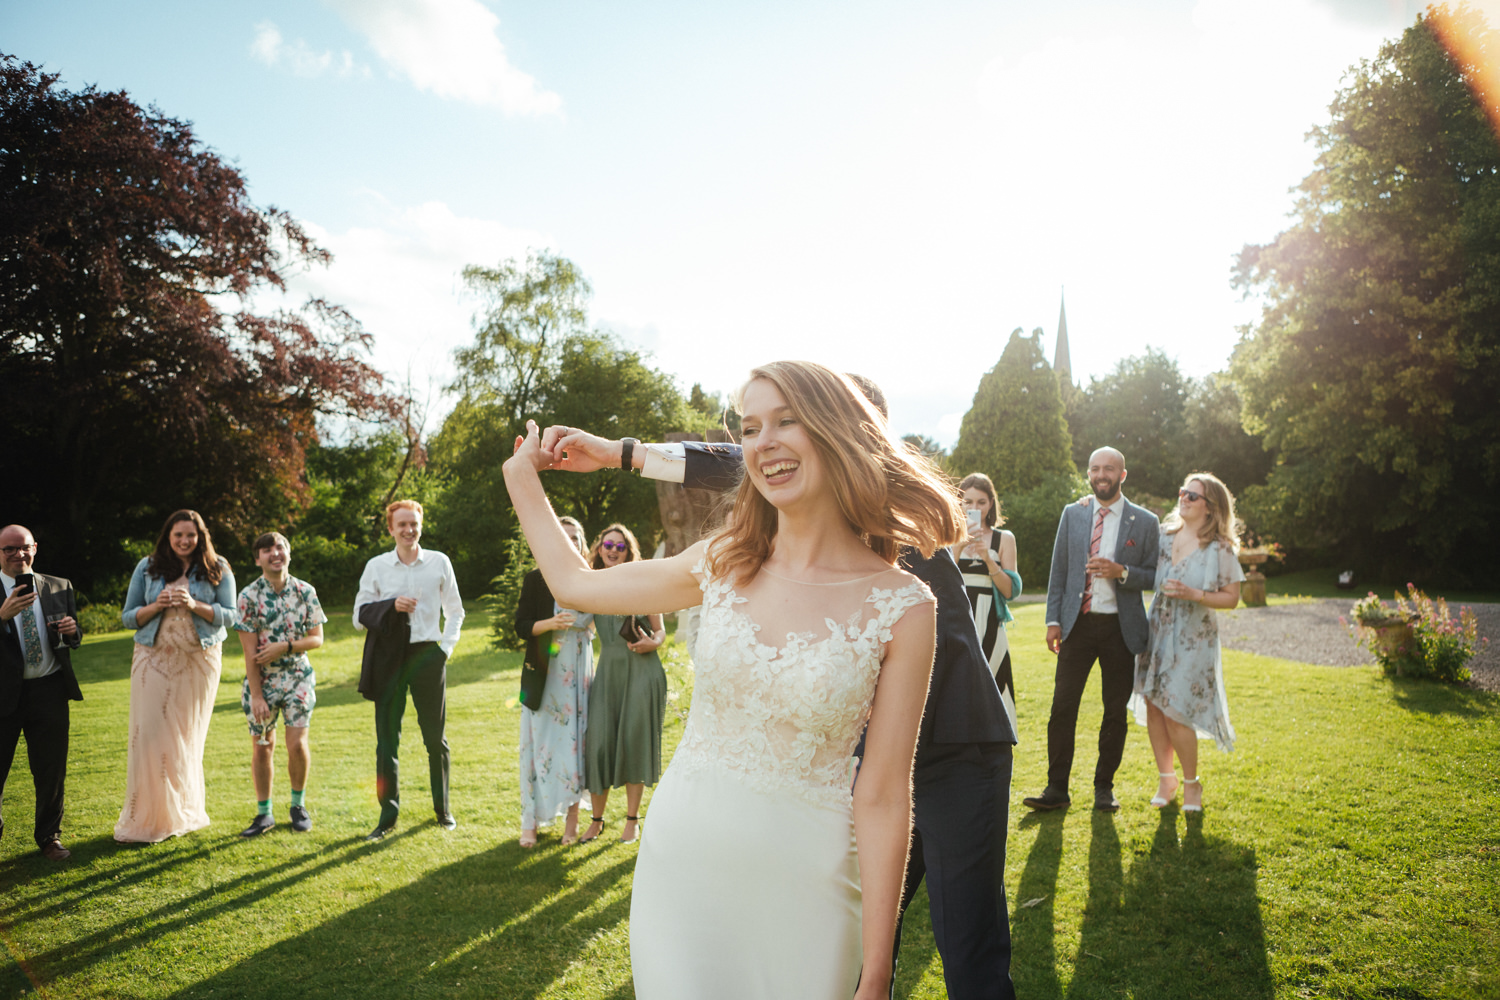 Purton House Wedding Photography, dancing on the lawn, outdoor wedding